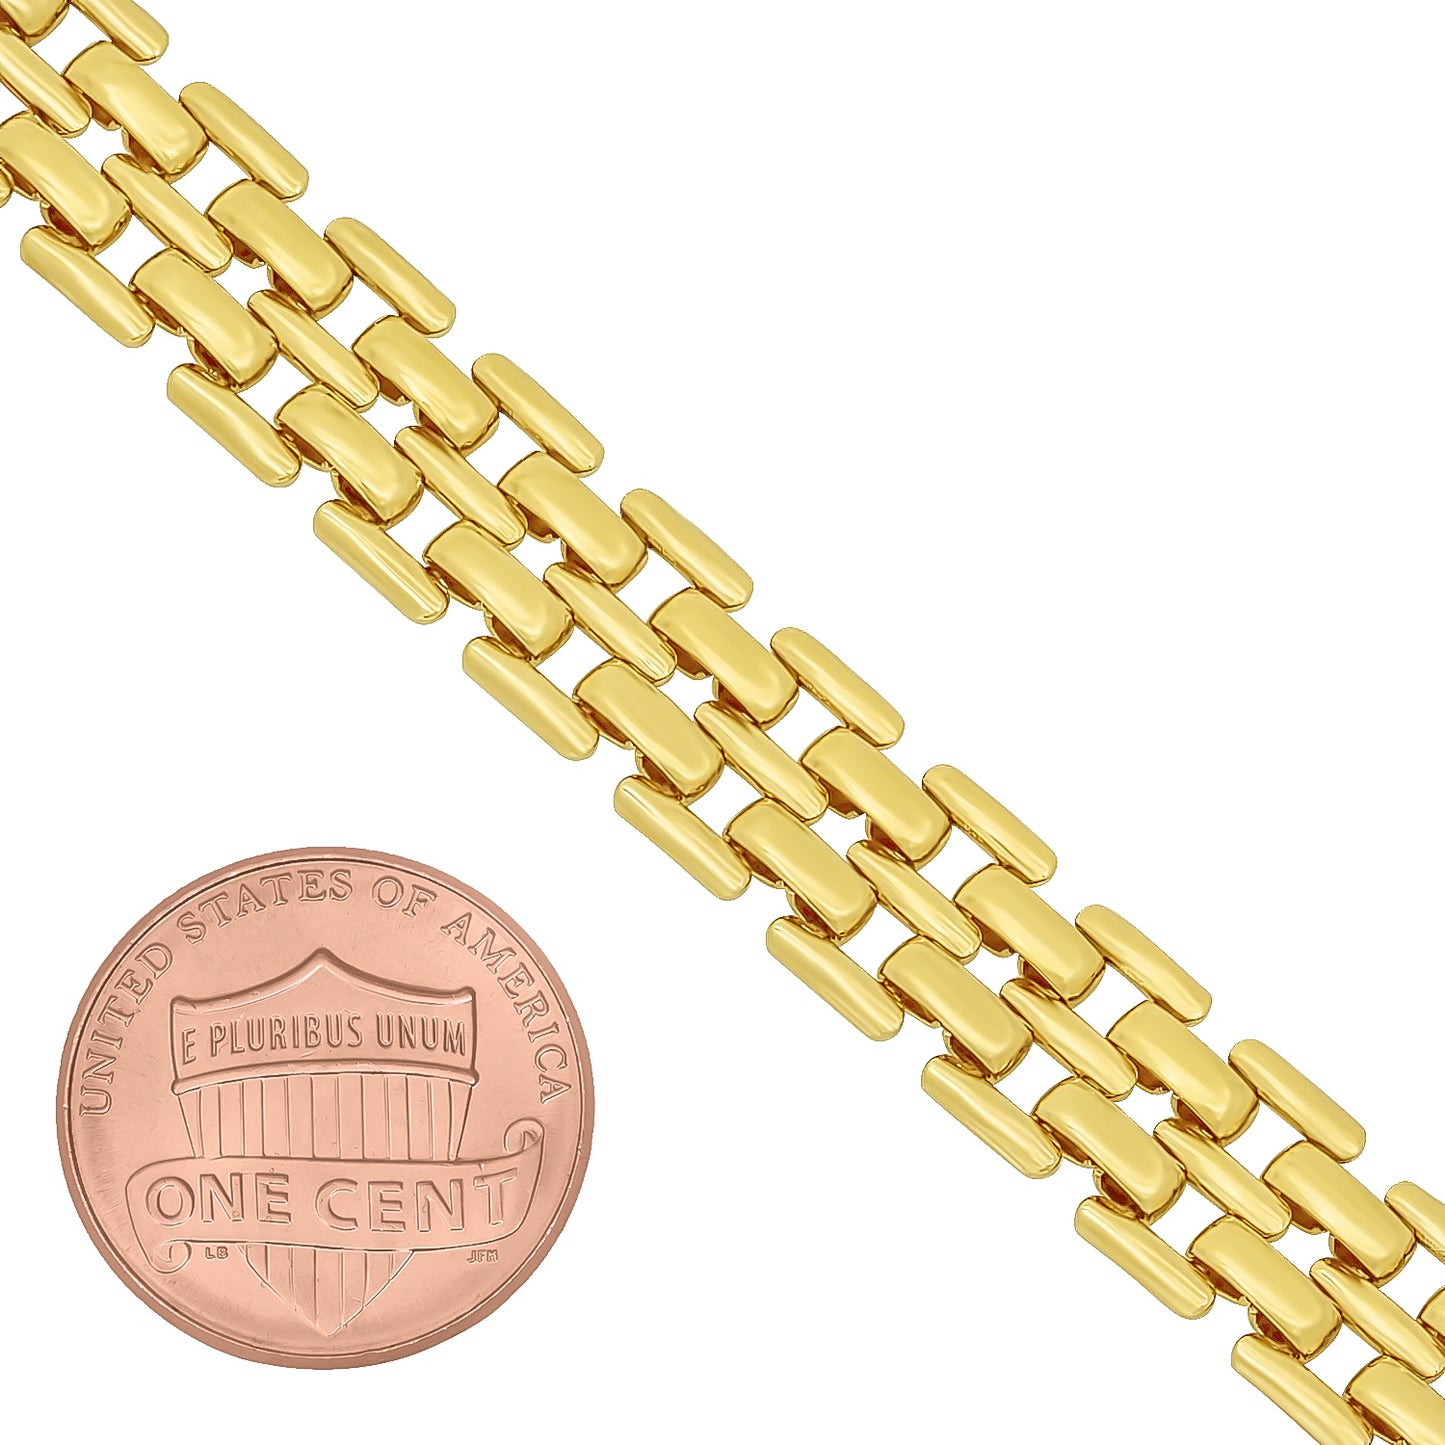 Men's 9mm 14k Yellow Gold Plated Flat Panther Link Chain Bracelet, 9 inches (SKU: GL-058CB-09)